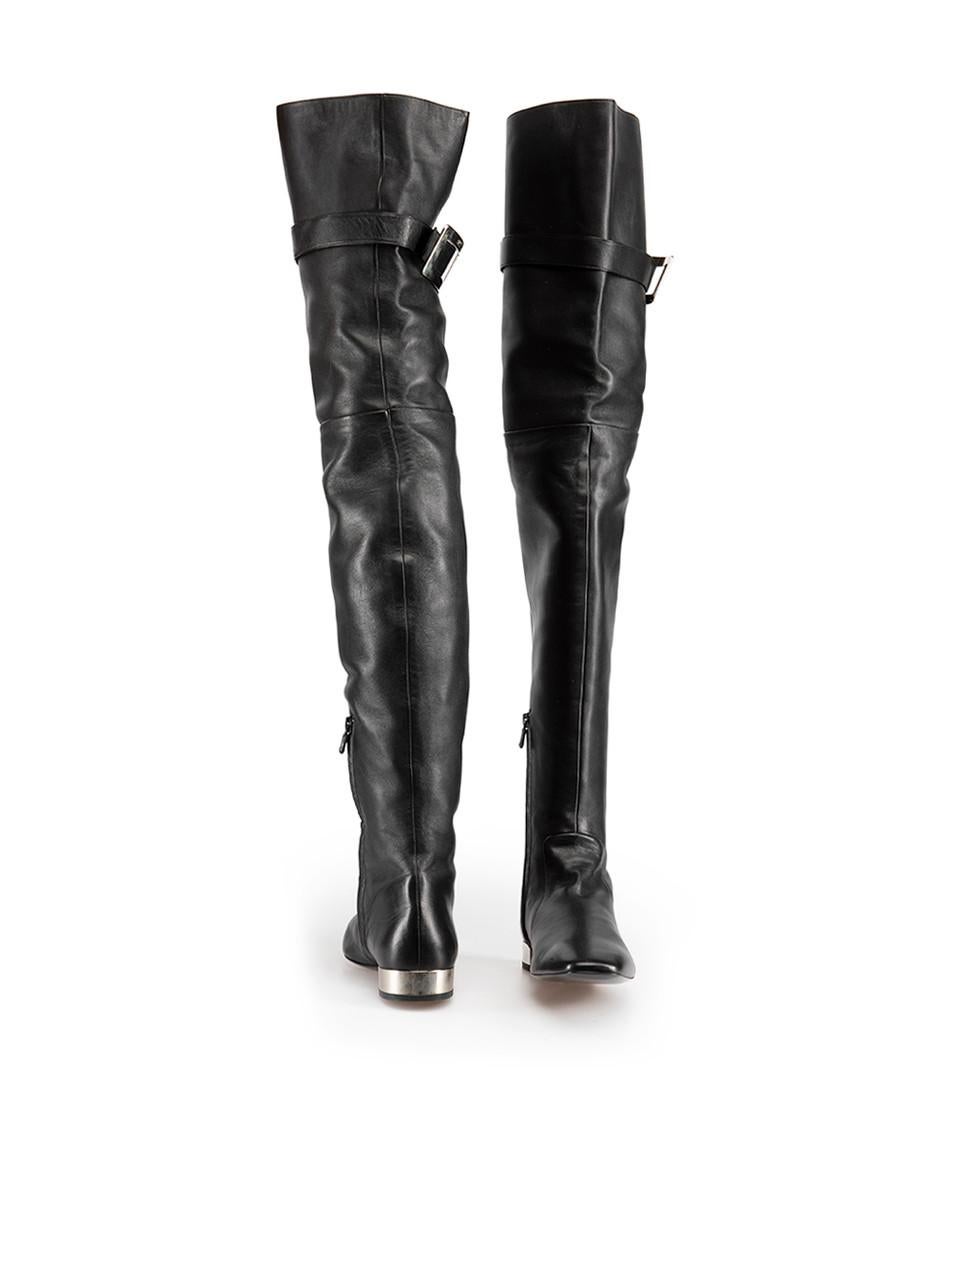 Roger Vivier Black Stivali Cuissard Over Knee Boots Size IT 39 In New Condition In London, GB